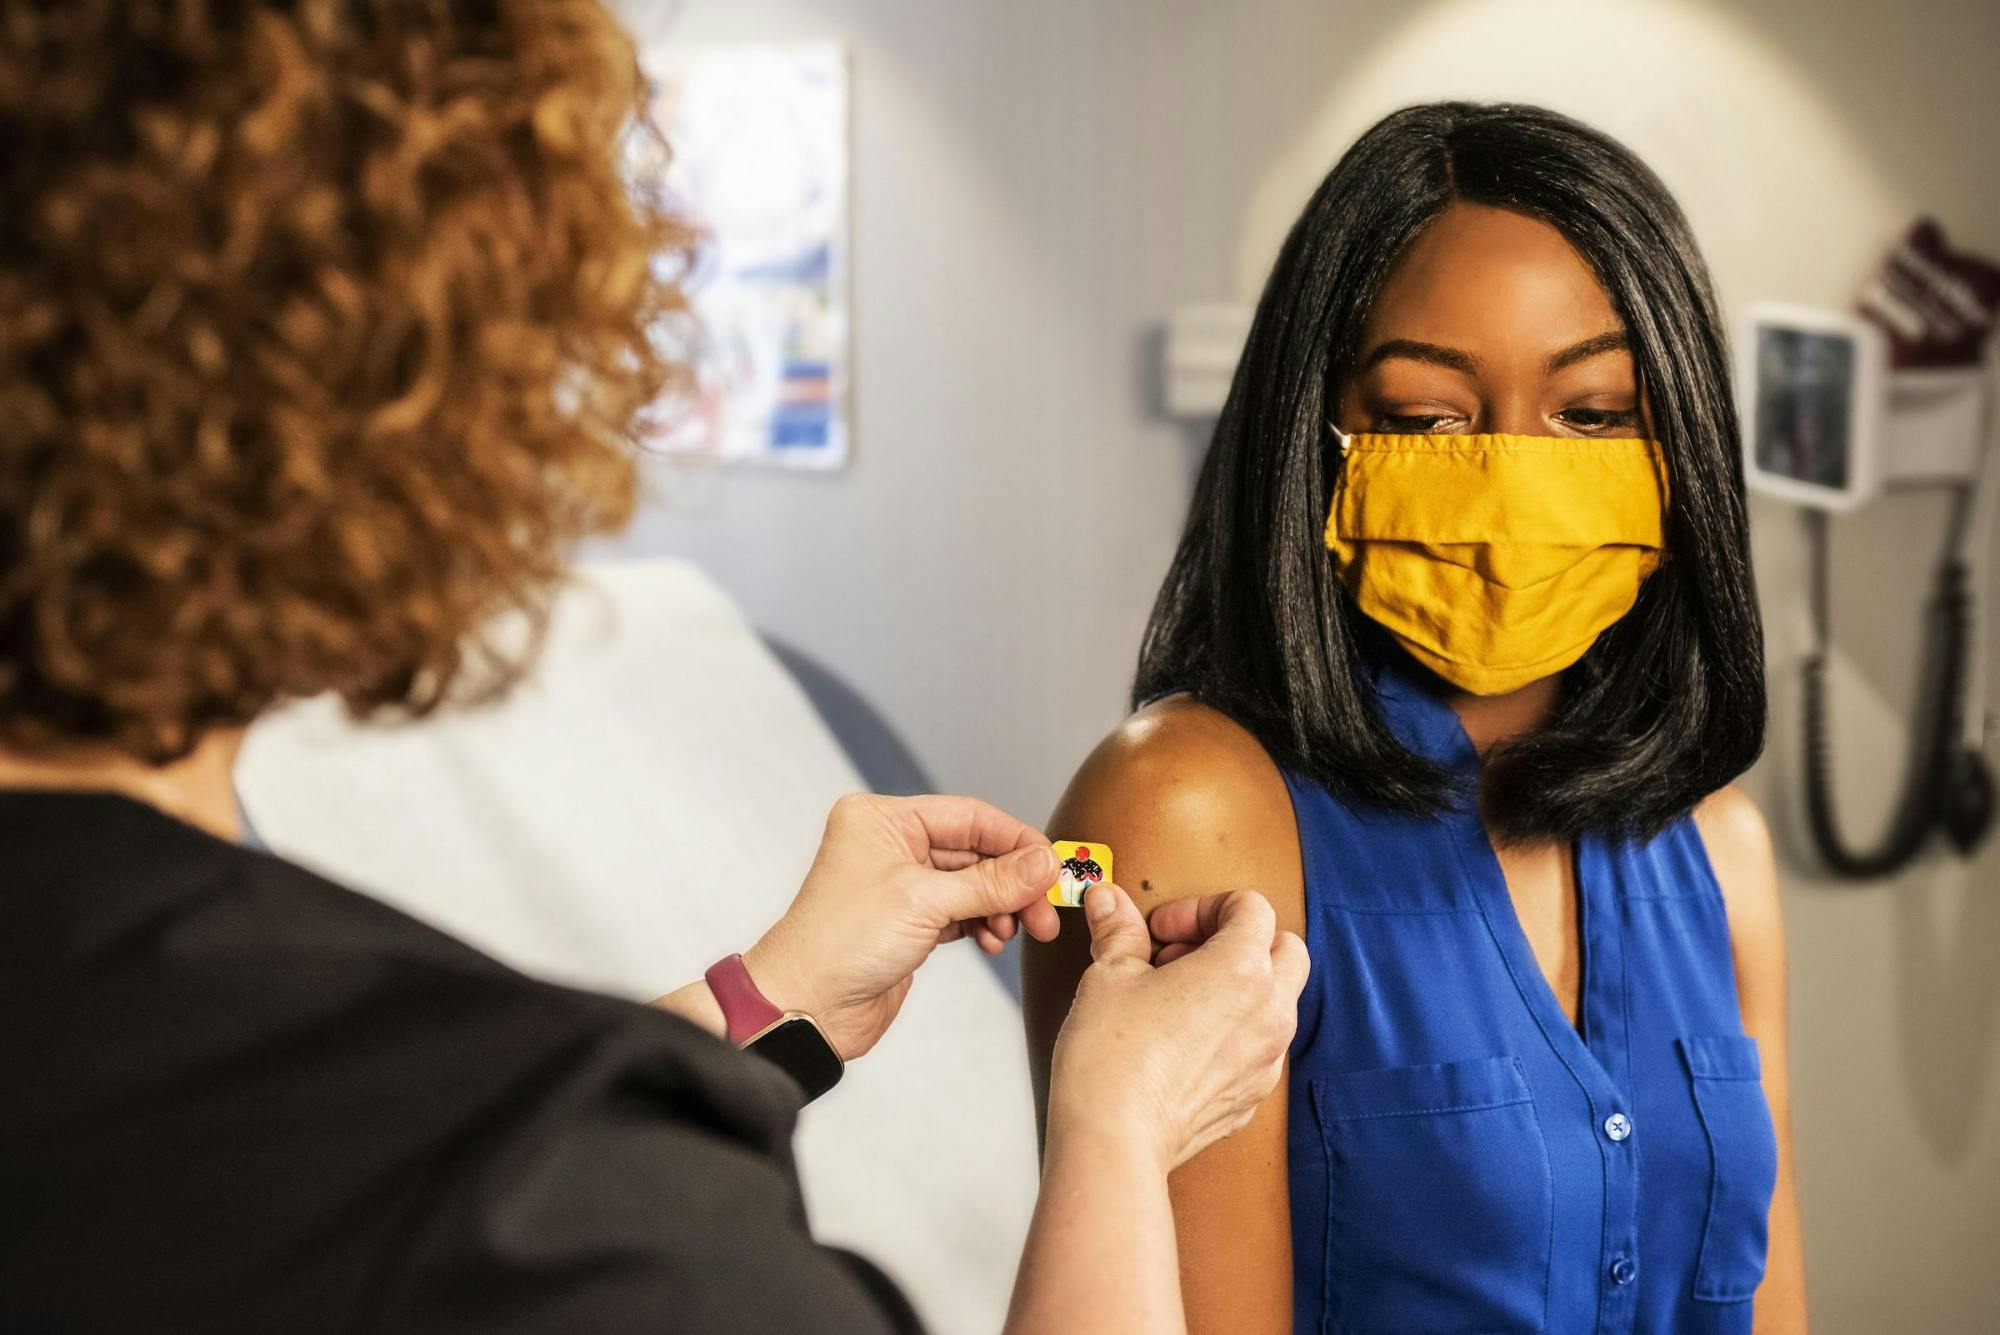 A young black woman in blue shirt receiving a vaccination